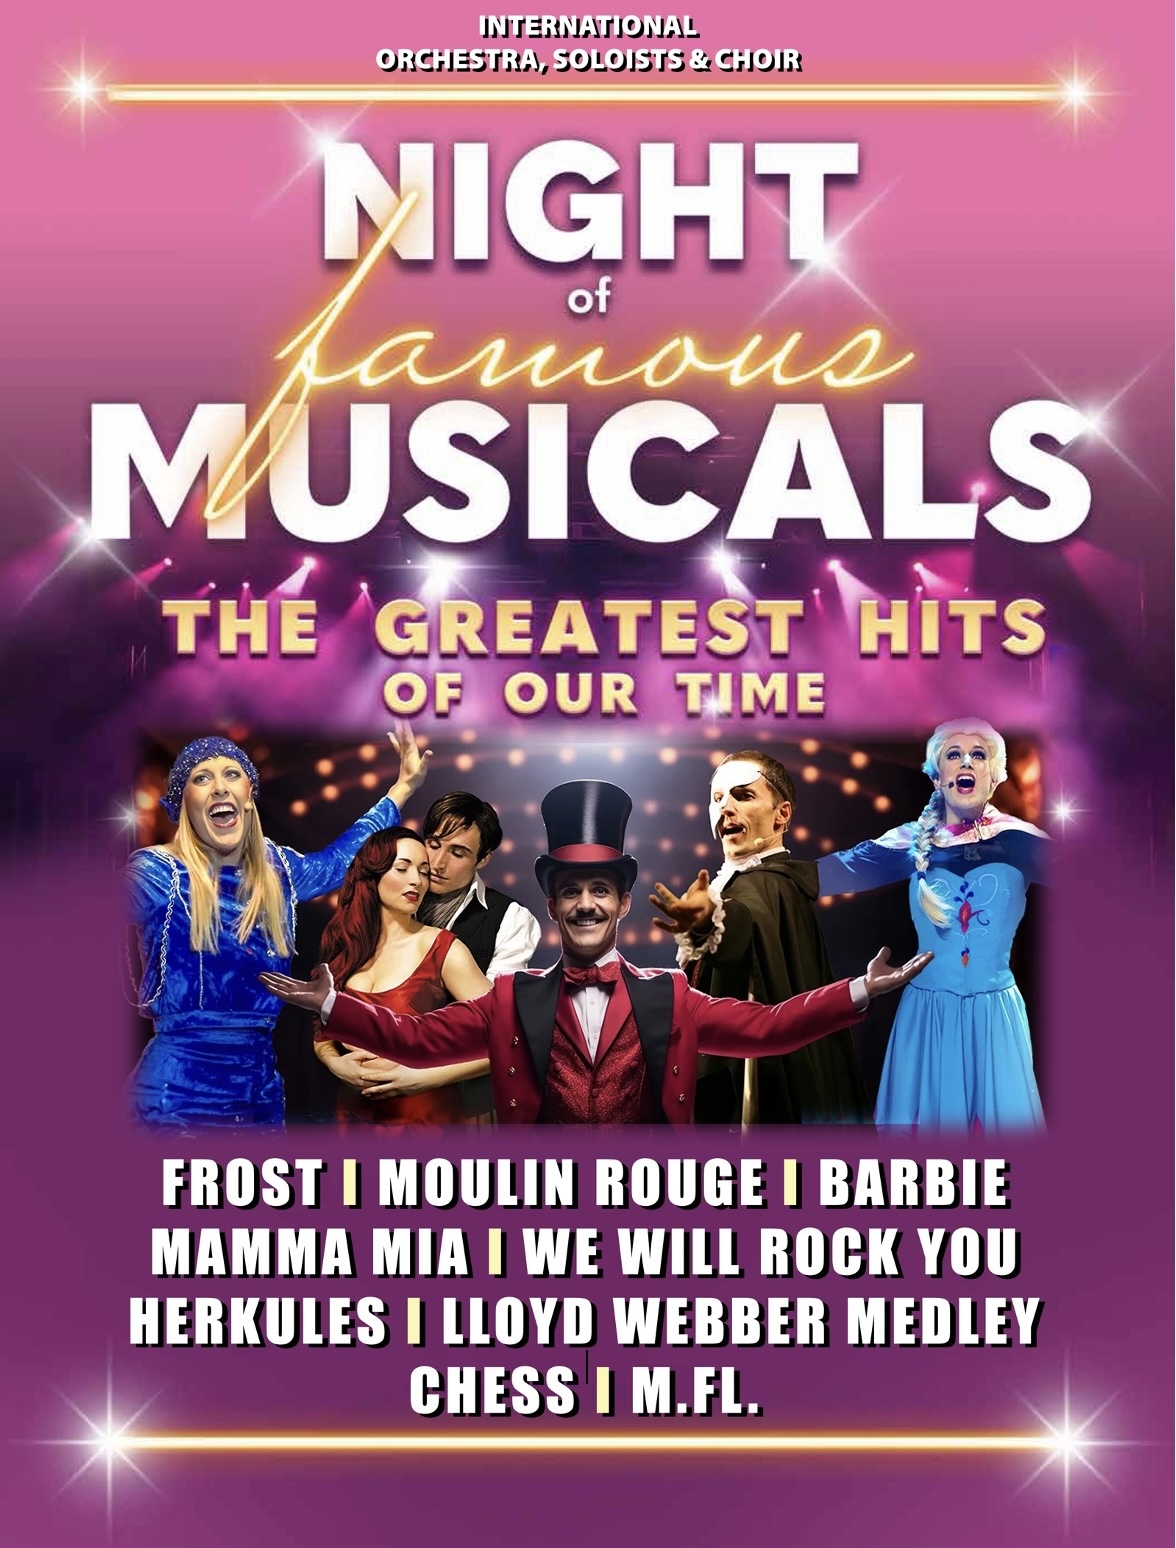 NIGHT OF FAMOUS MUSICALS